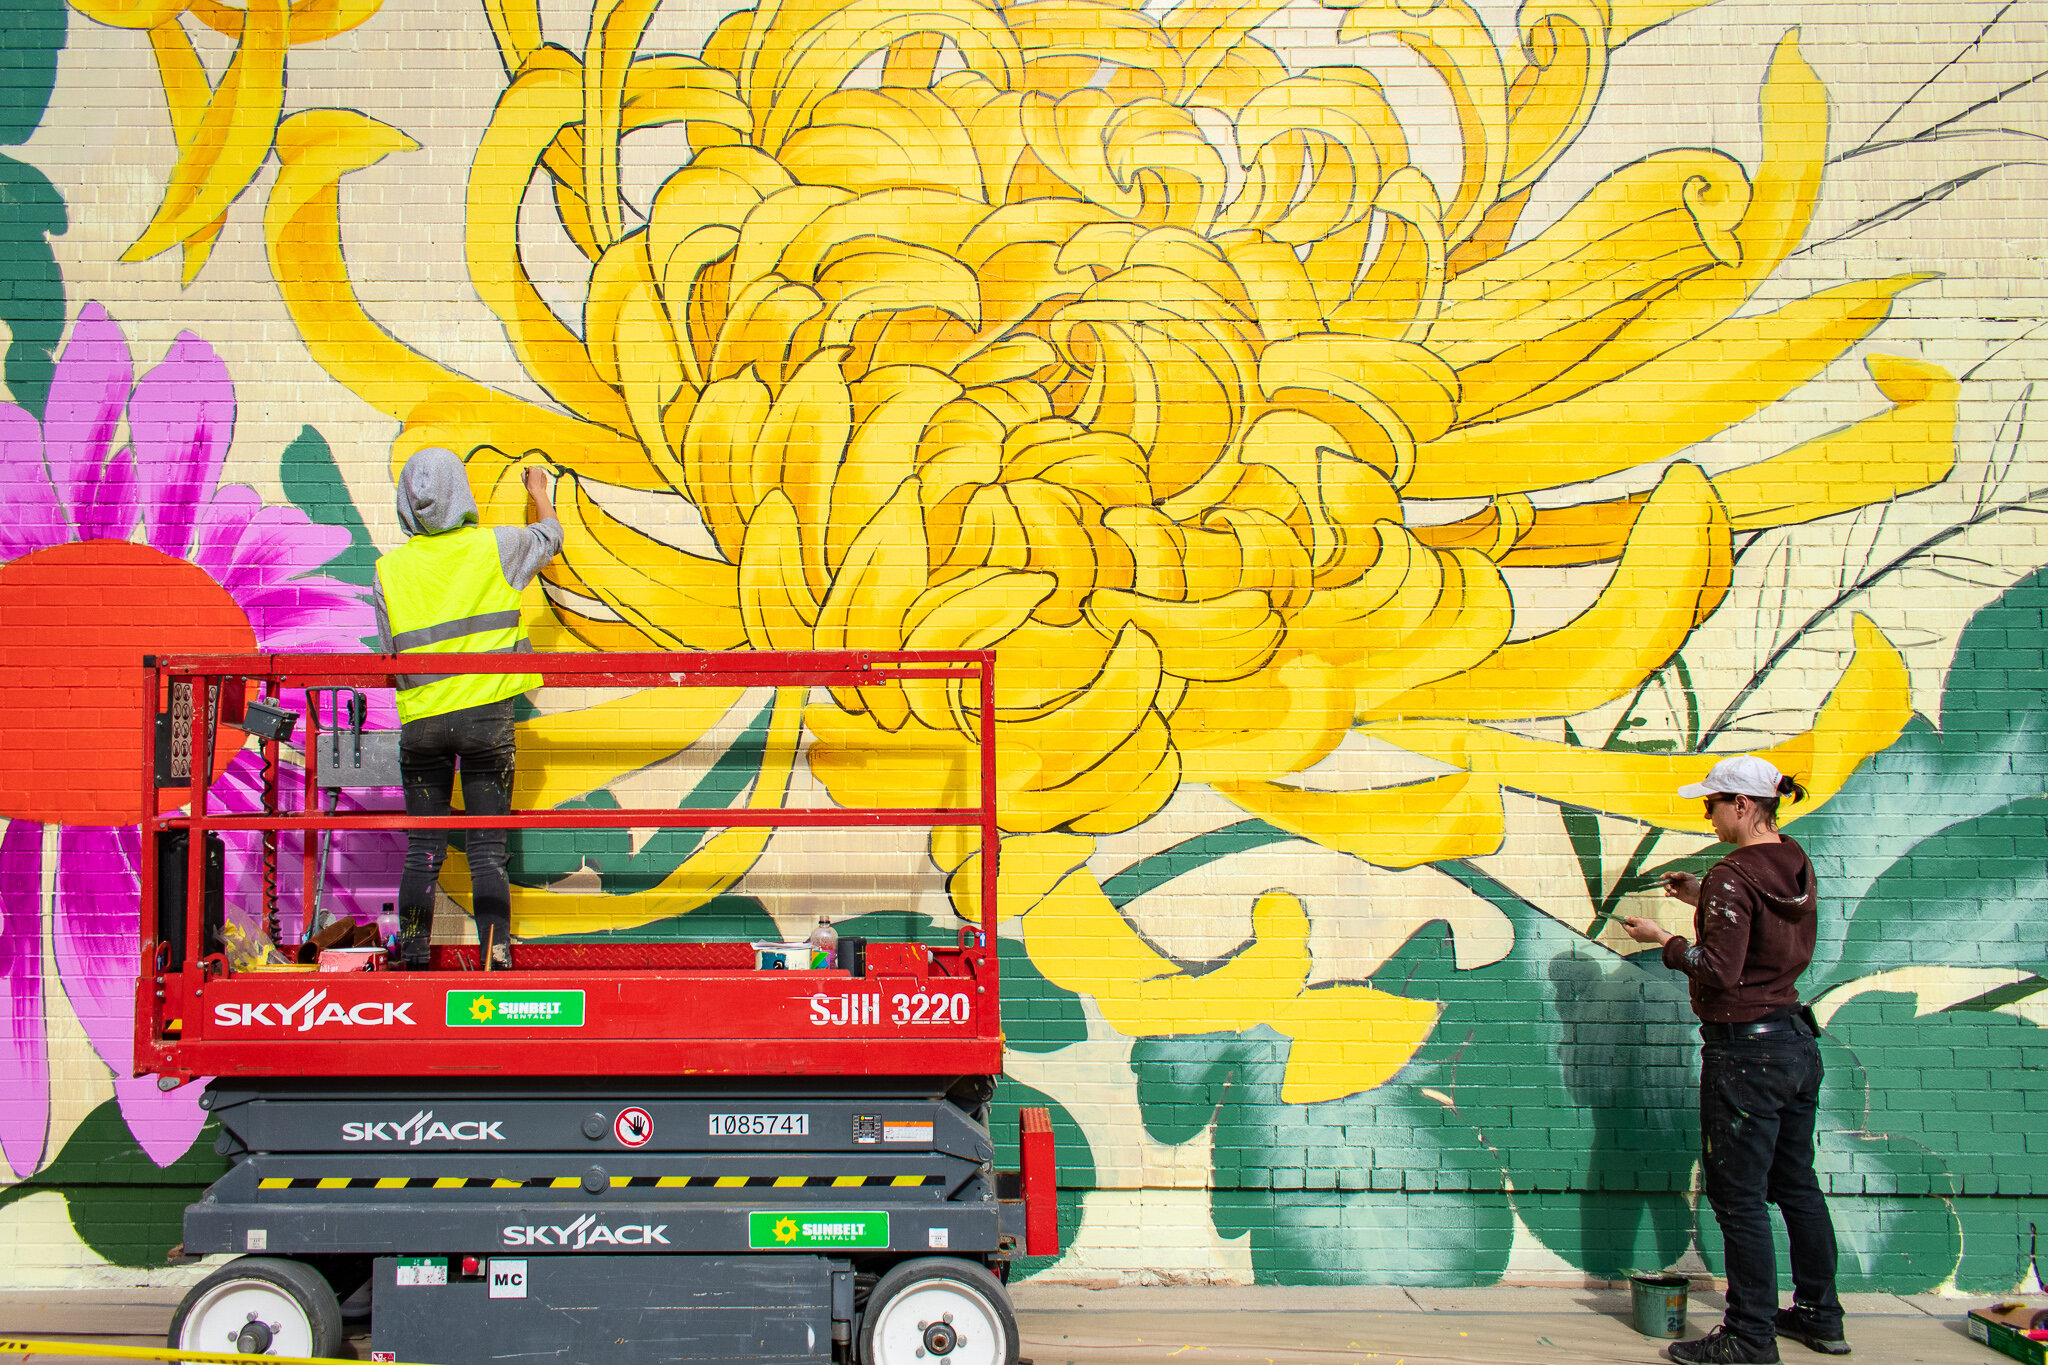 Celebrate Creativity - Lakeview and Roscoe Village are home to a growing collection of public art. Locals and visitors alike enjoy the iconic murals and sculptures, cultural events, and other artistic offerings that our communities have to offer.